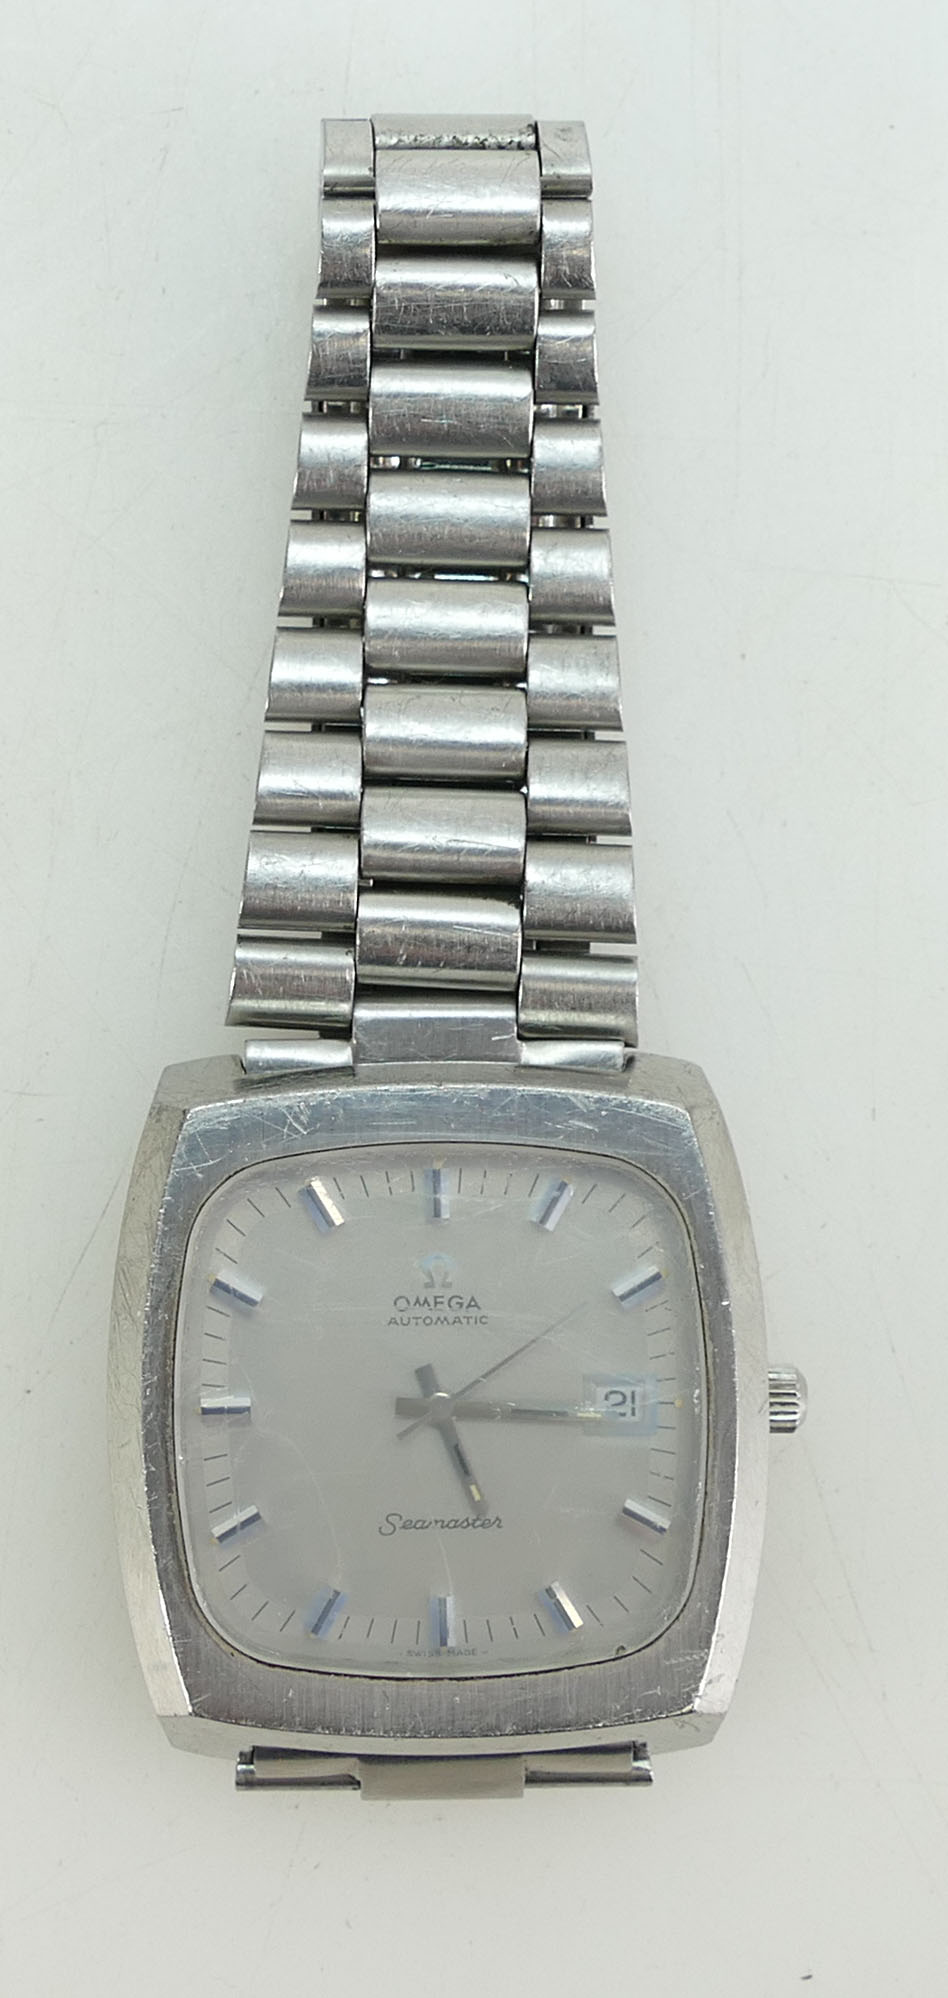 1970's Omega Seamaster big square automatic stainless steel wristwatch with steel bracelet - Image 3 of 3